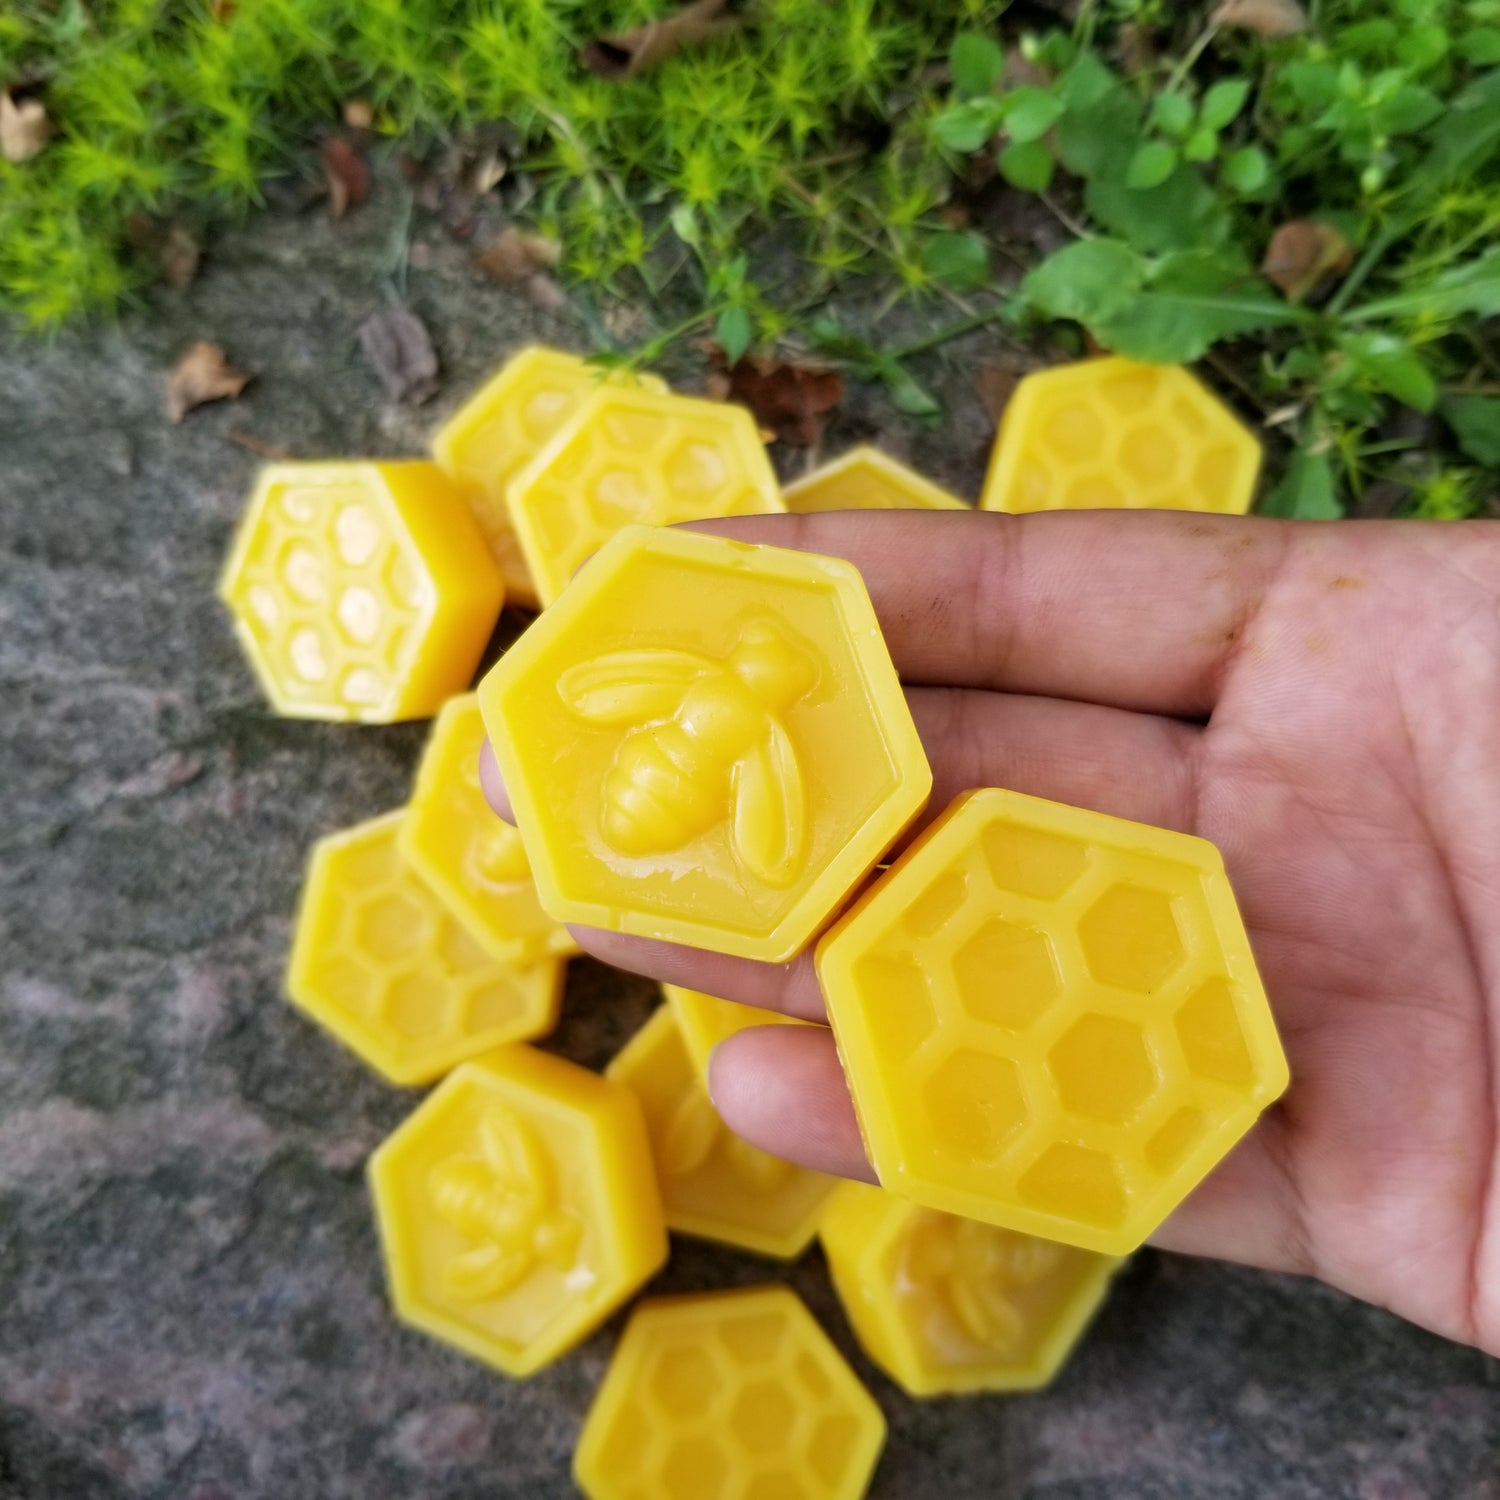 beeswax patties held on palm of hand